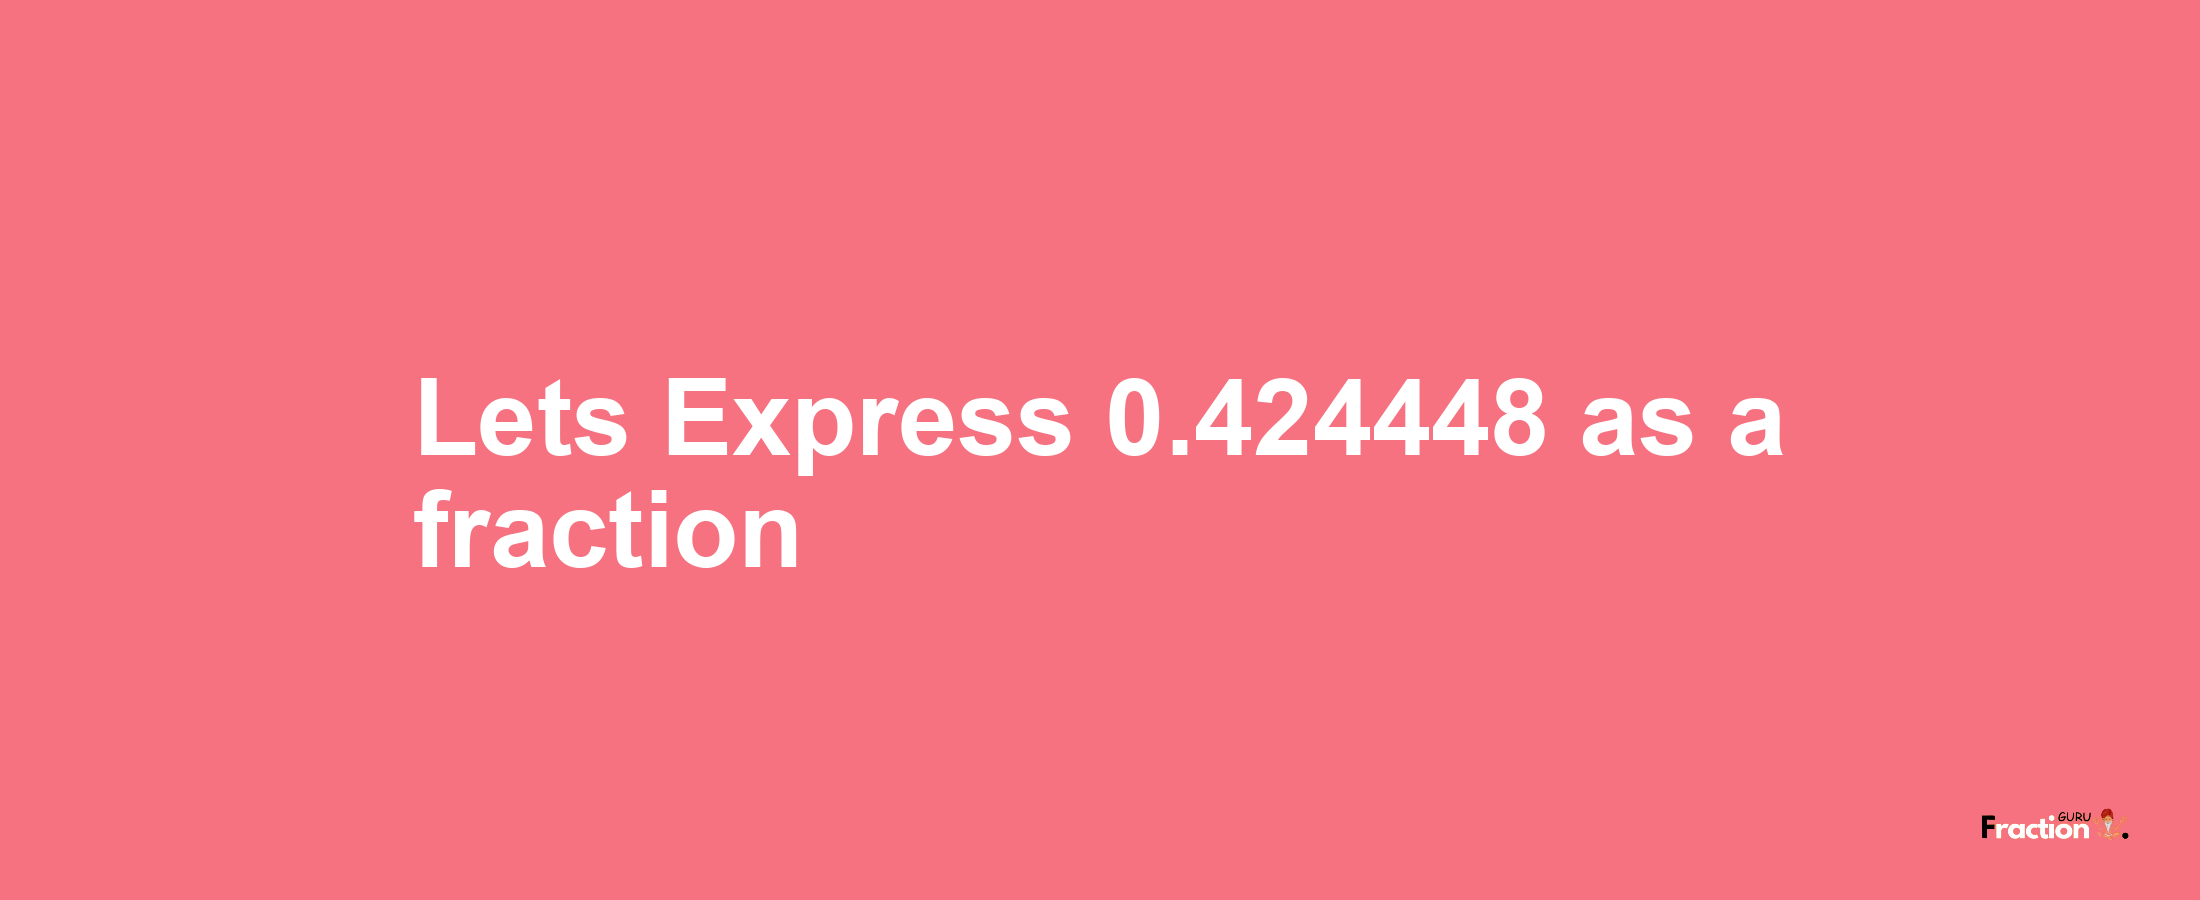 Lets Express 0.424448 as afraction